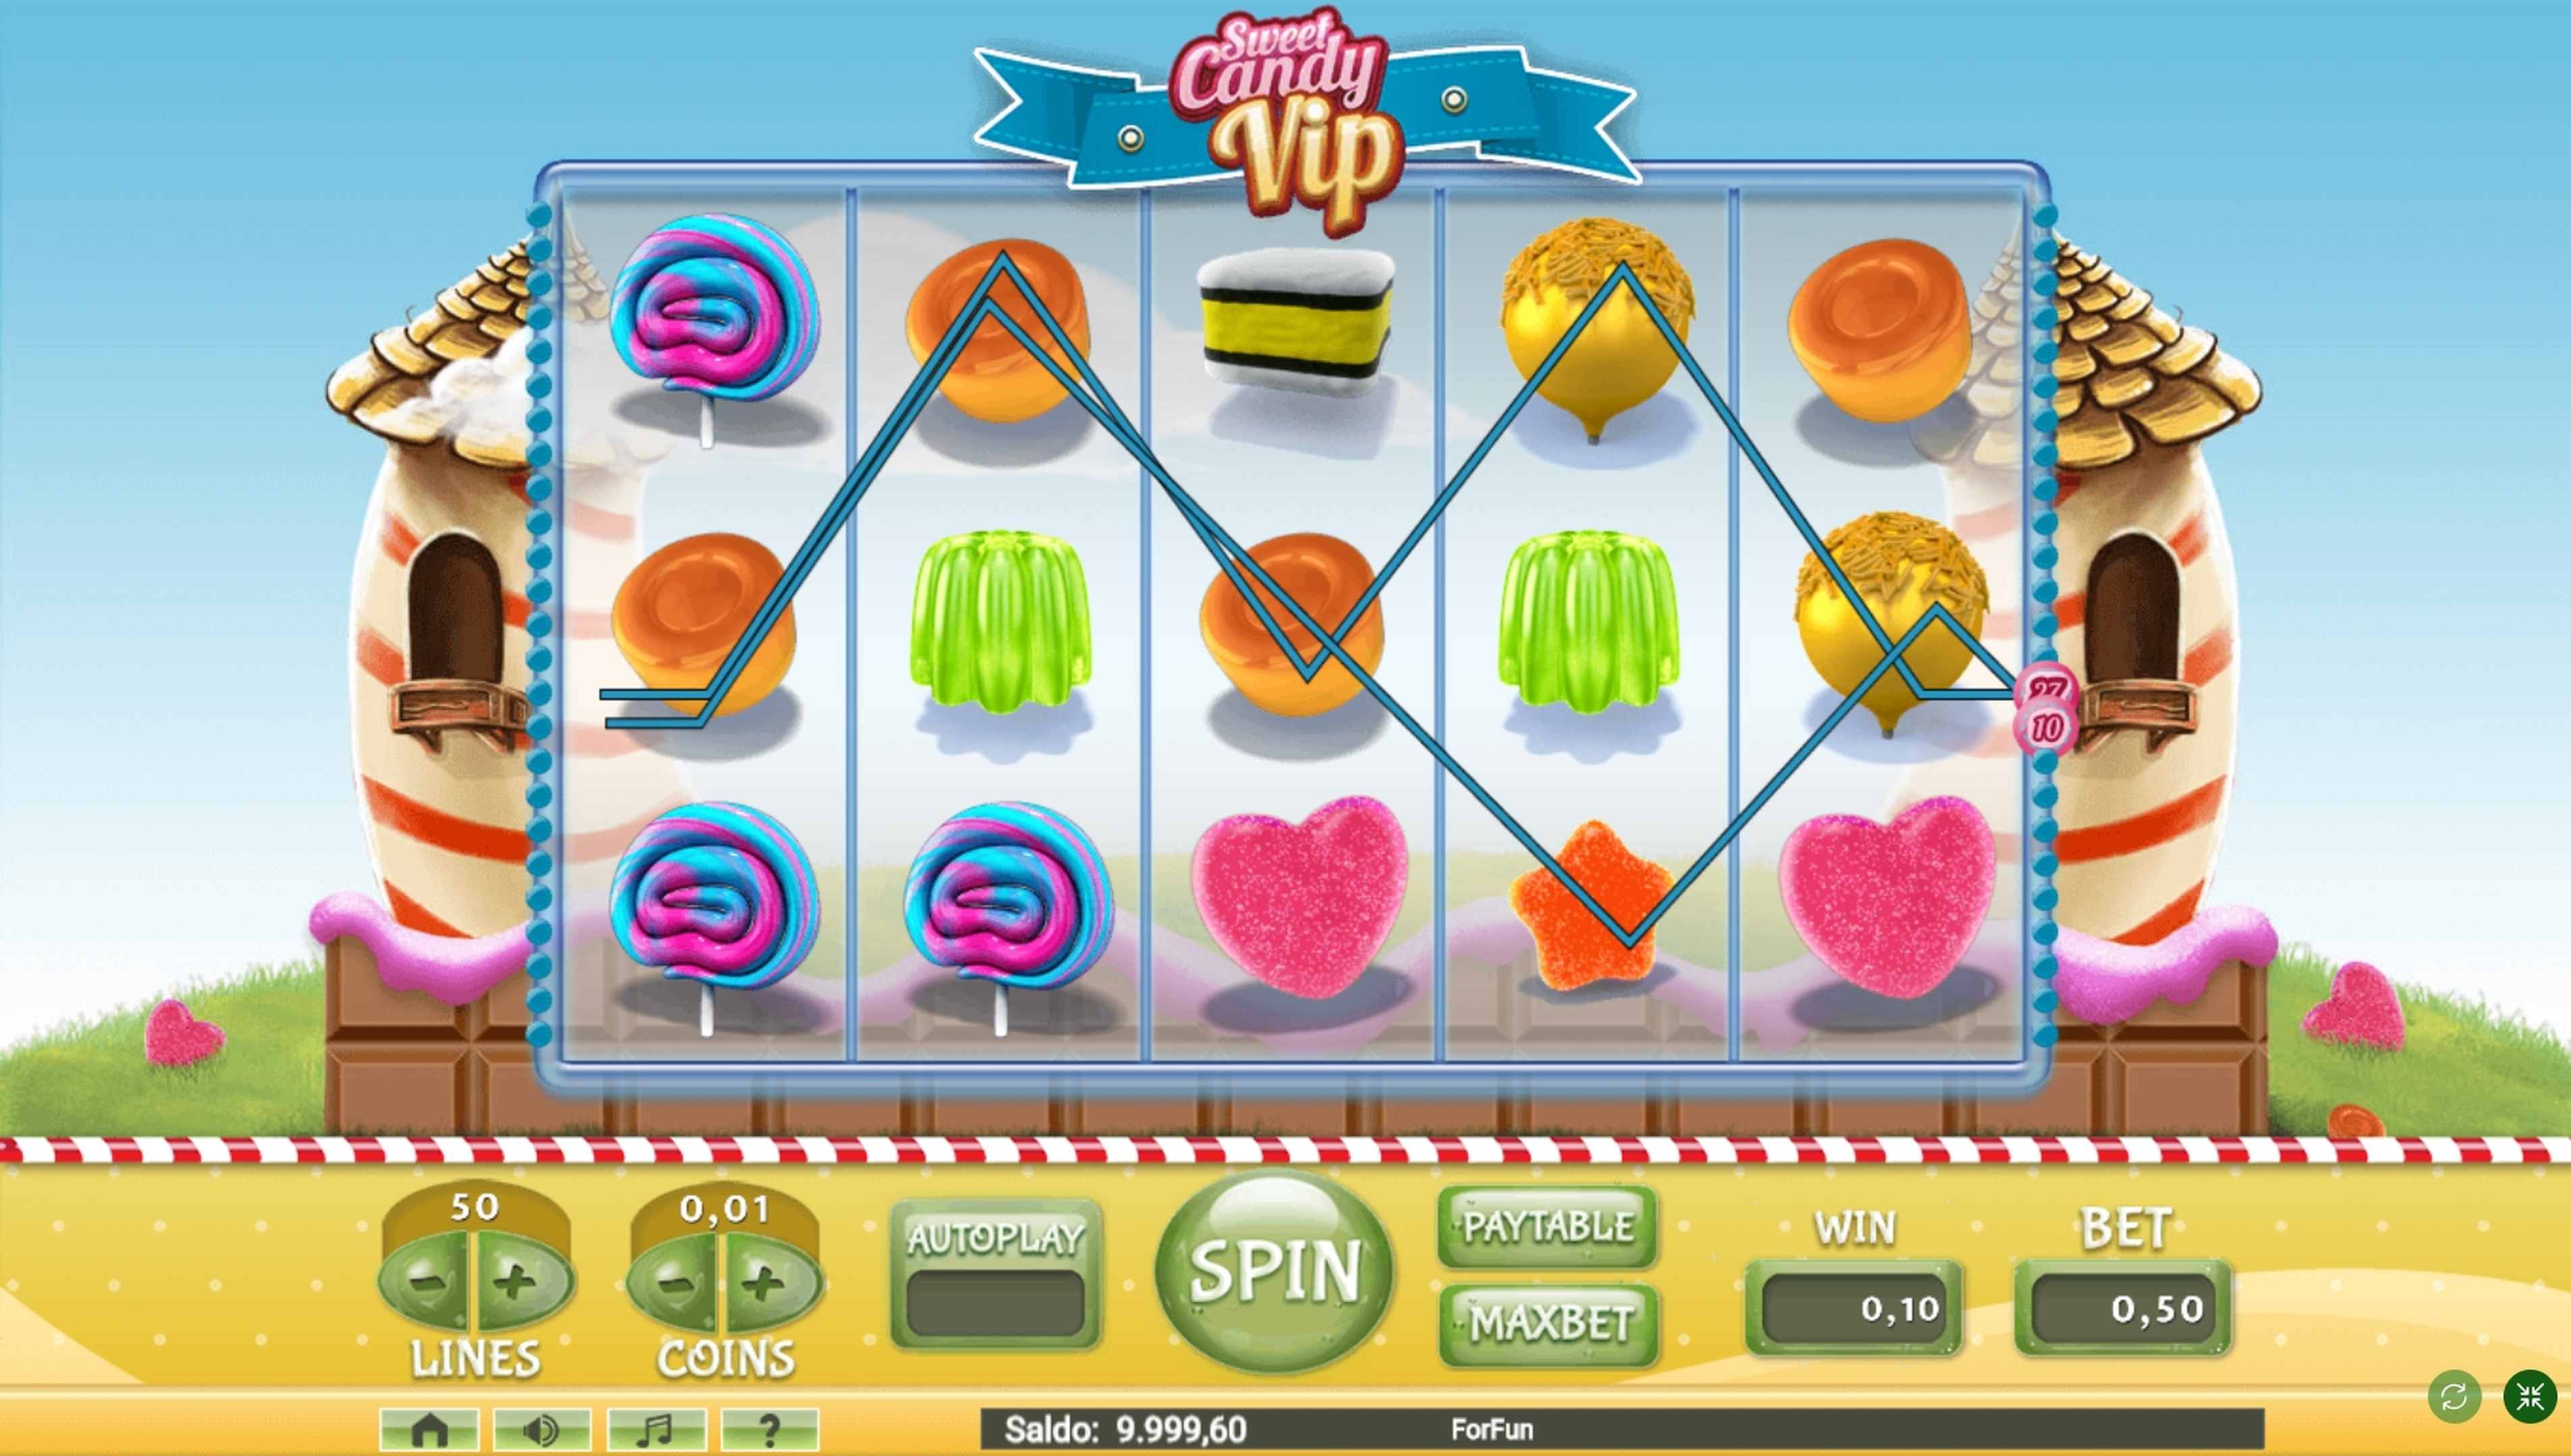 Win Money in Sweet Candy Vip Free Slot Game by Tuko Productions